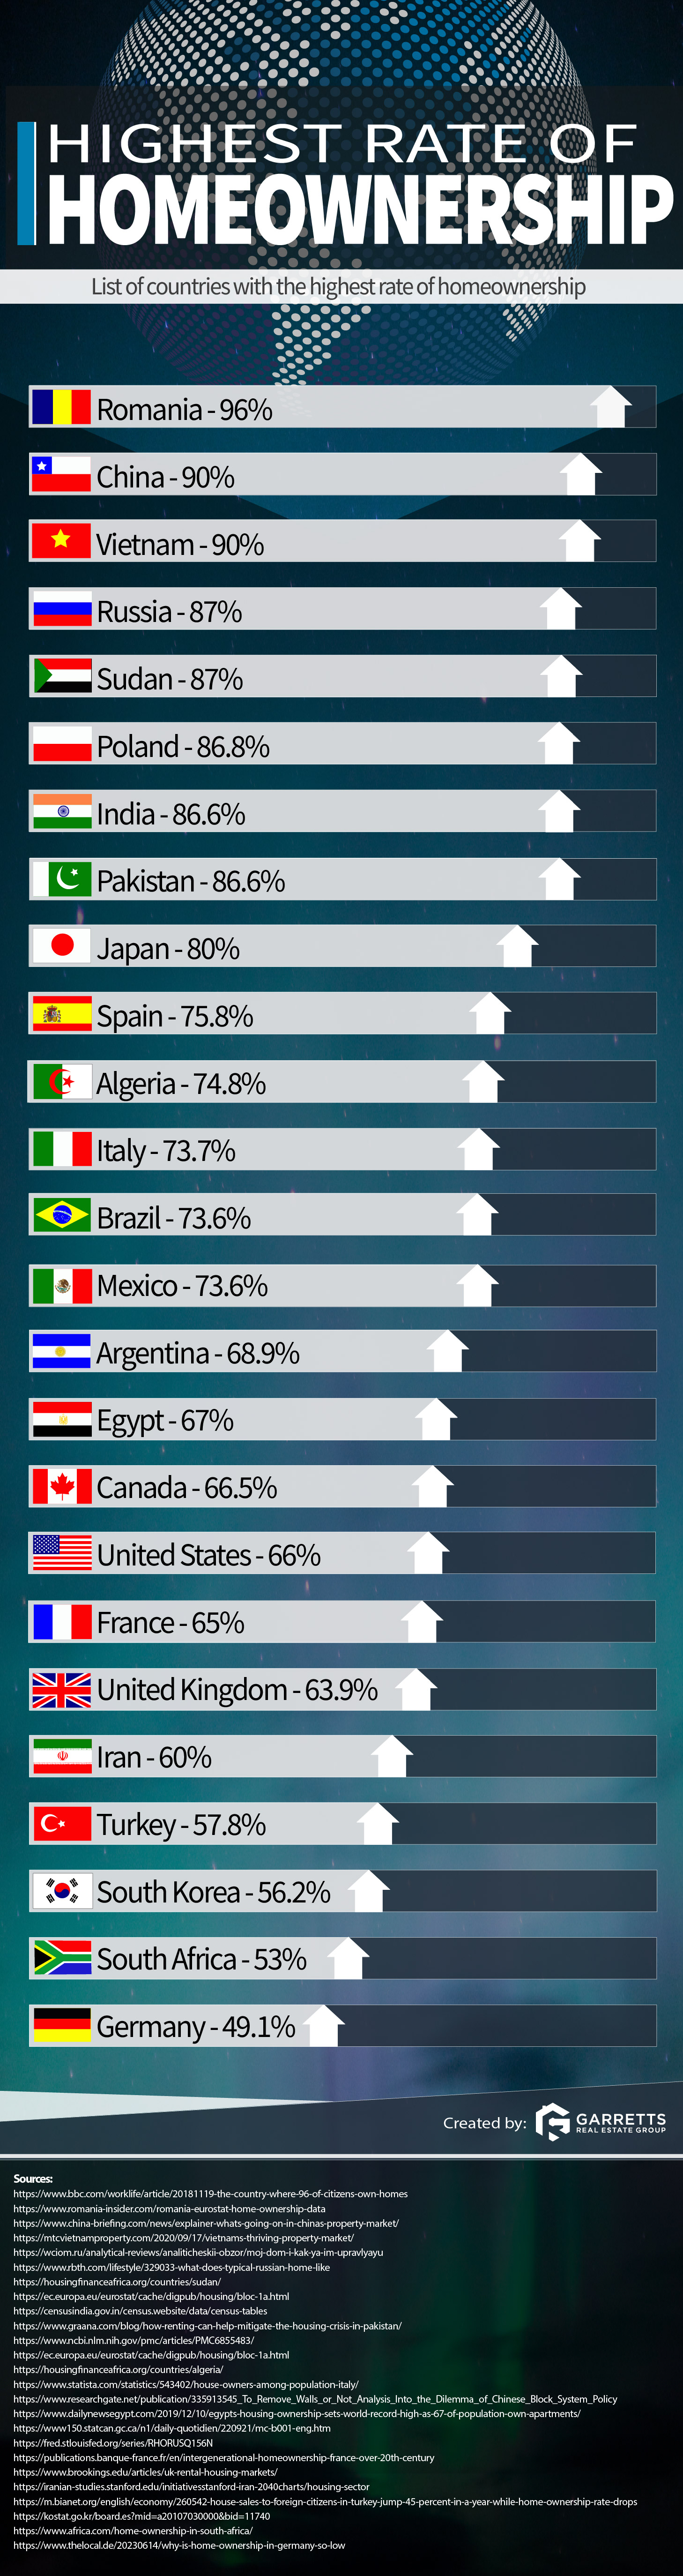 infographic showing the top countries around the world with the highest rate of homeownership